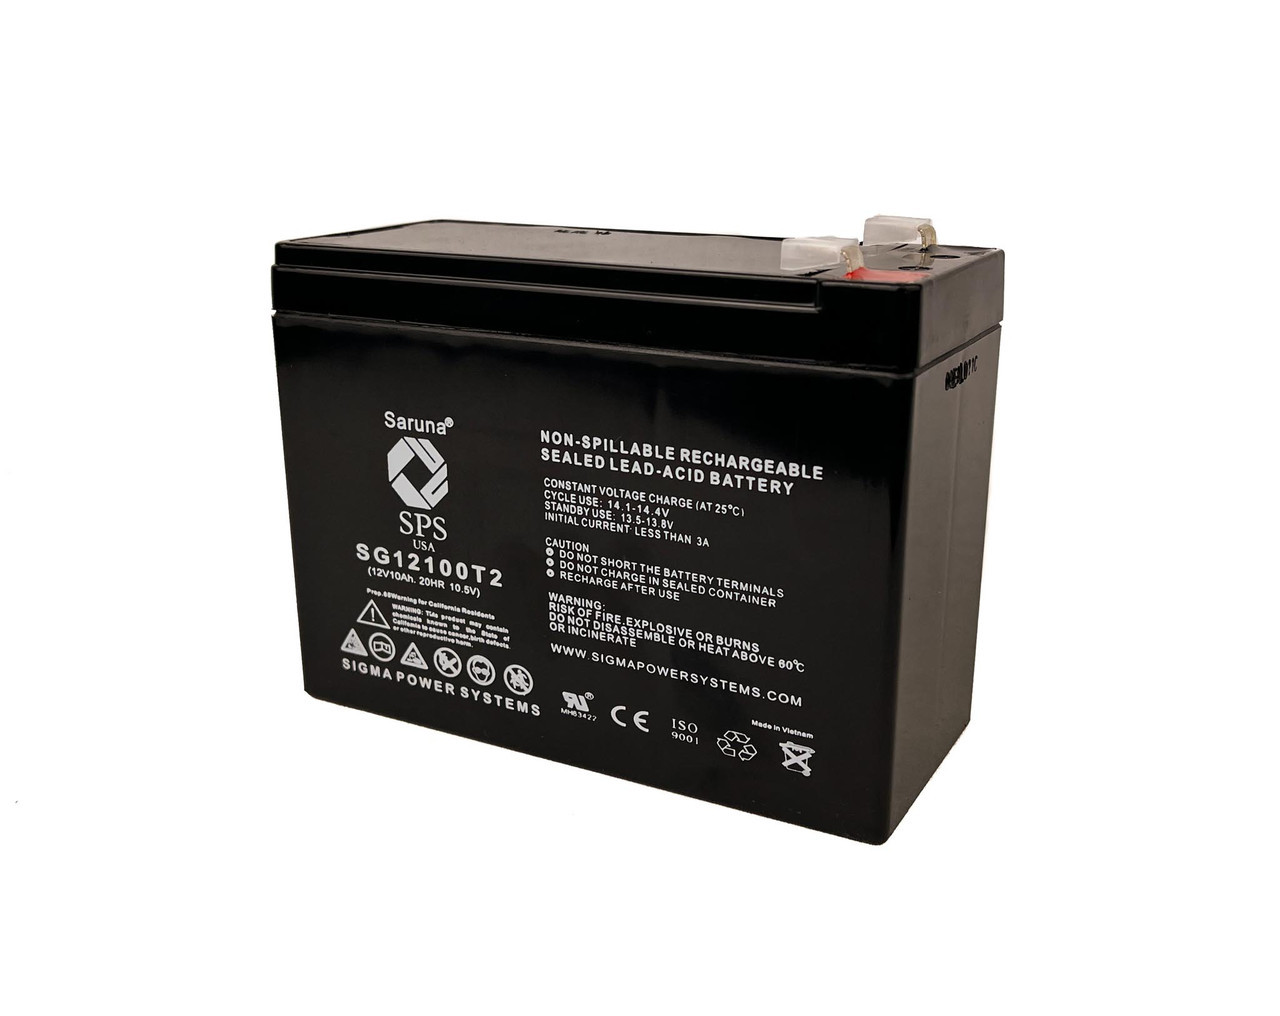 Raion Power 12V 10Ah Non-Spillable Replacement Rechargebale Battery for Shoprider Echo 3 SL73